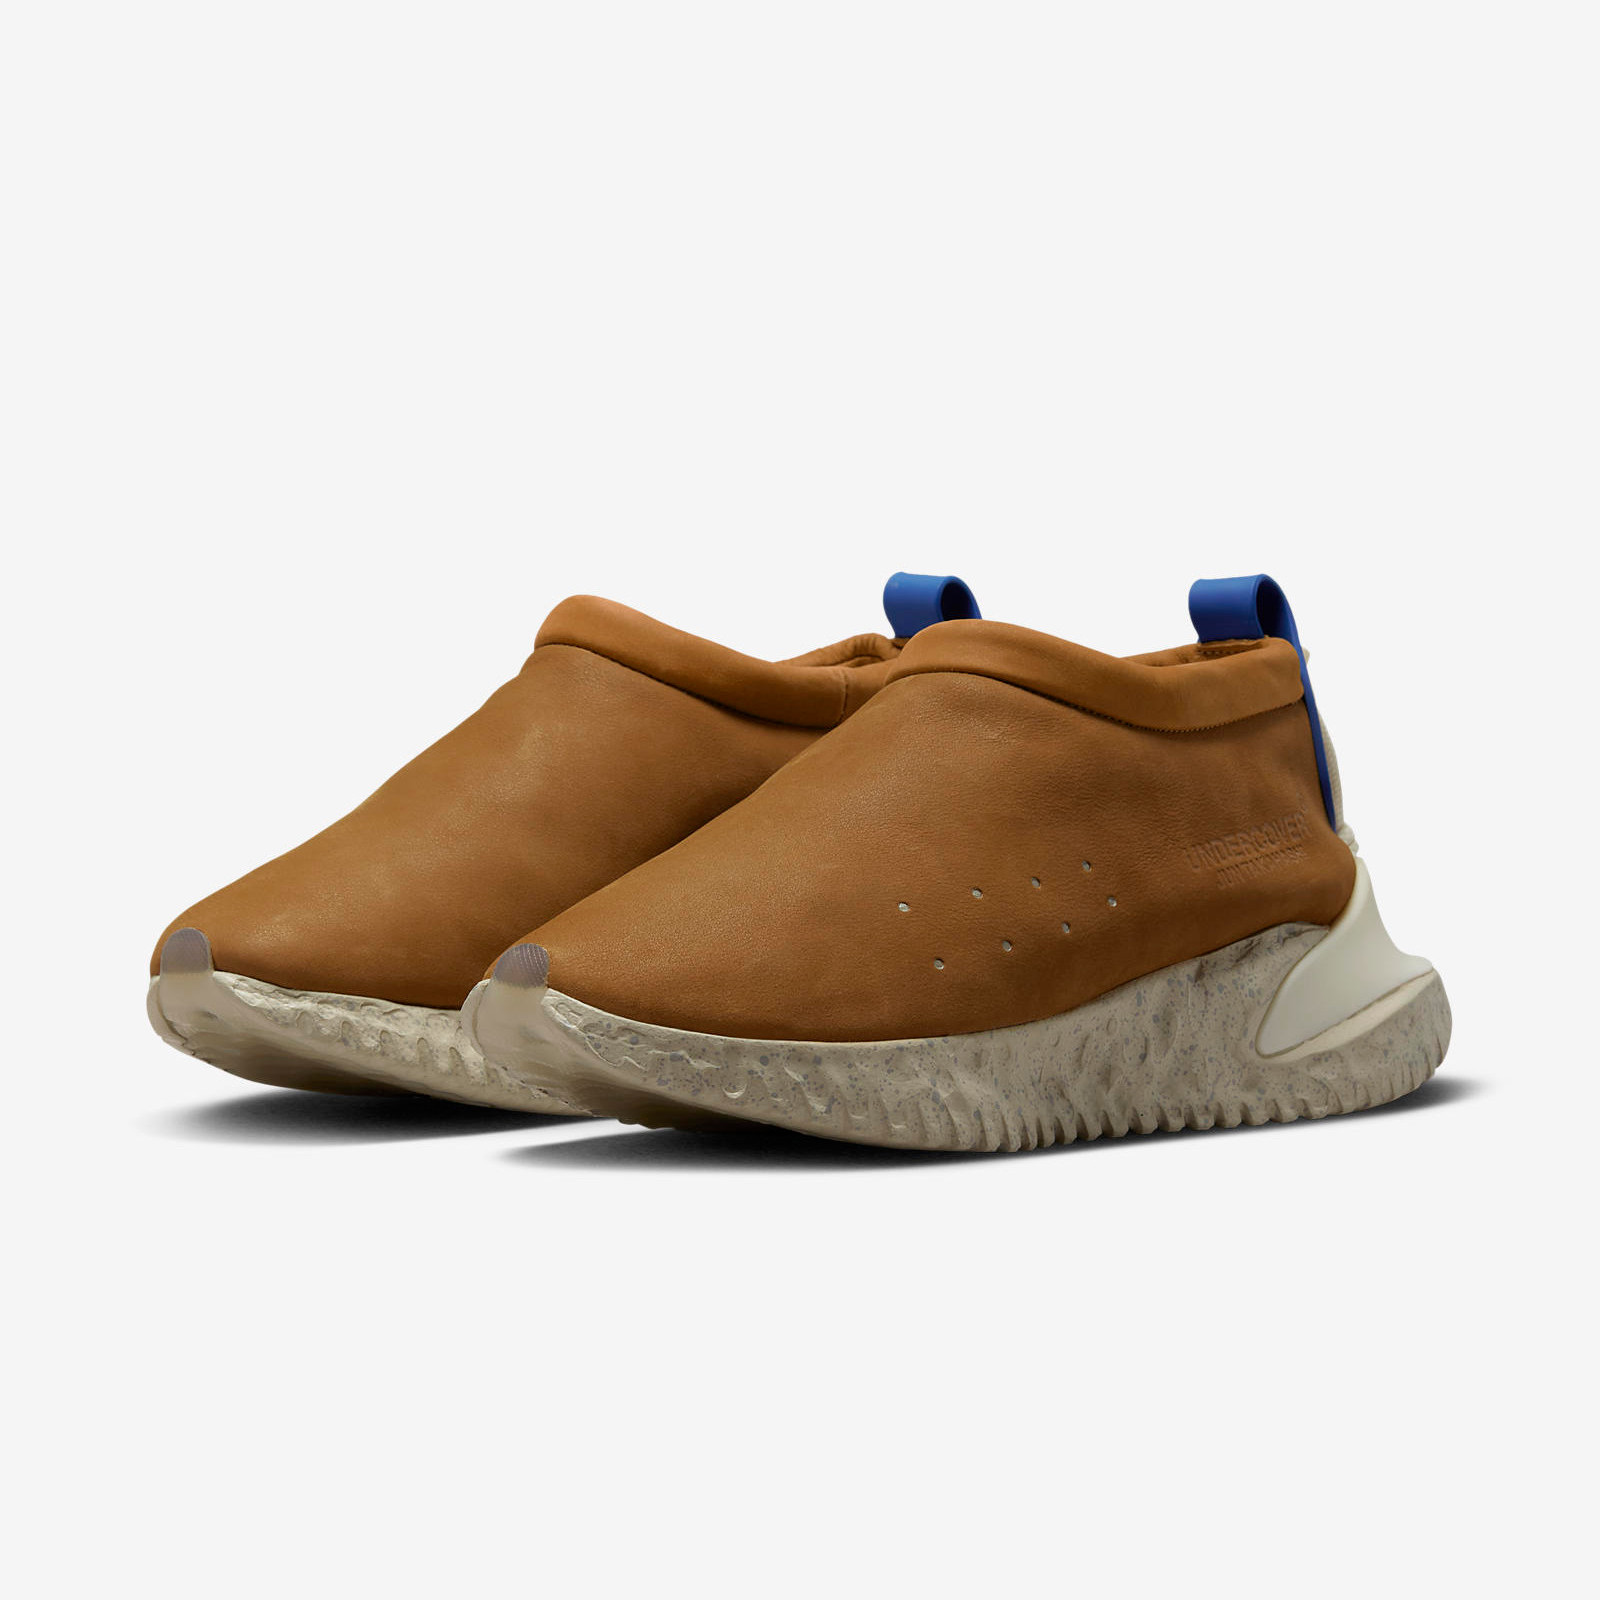 UNDERCOVER x Nike
Moc Flow
« Ale Brown »